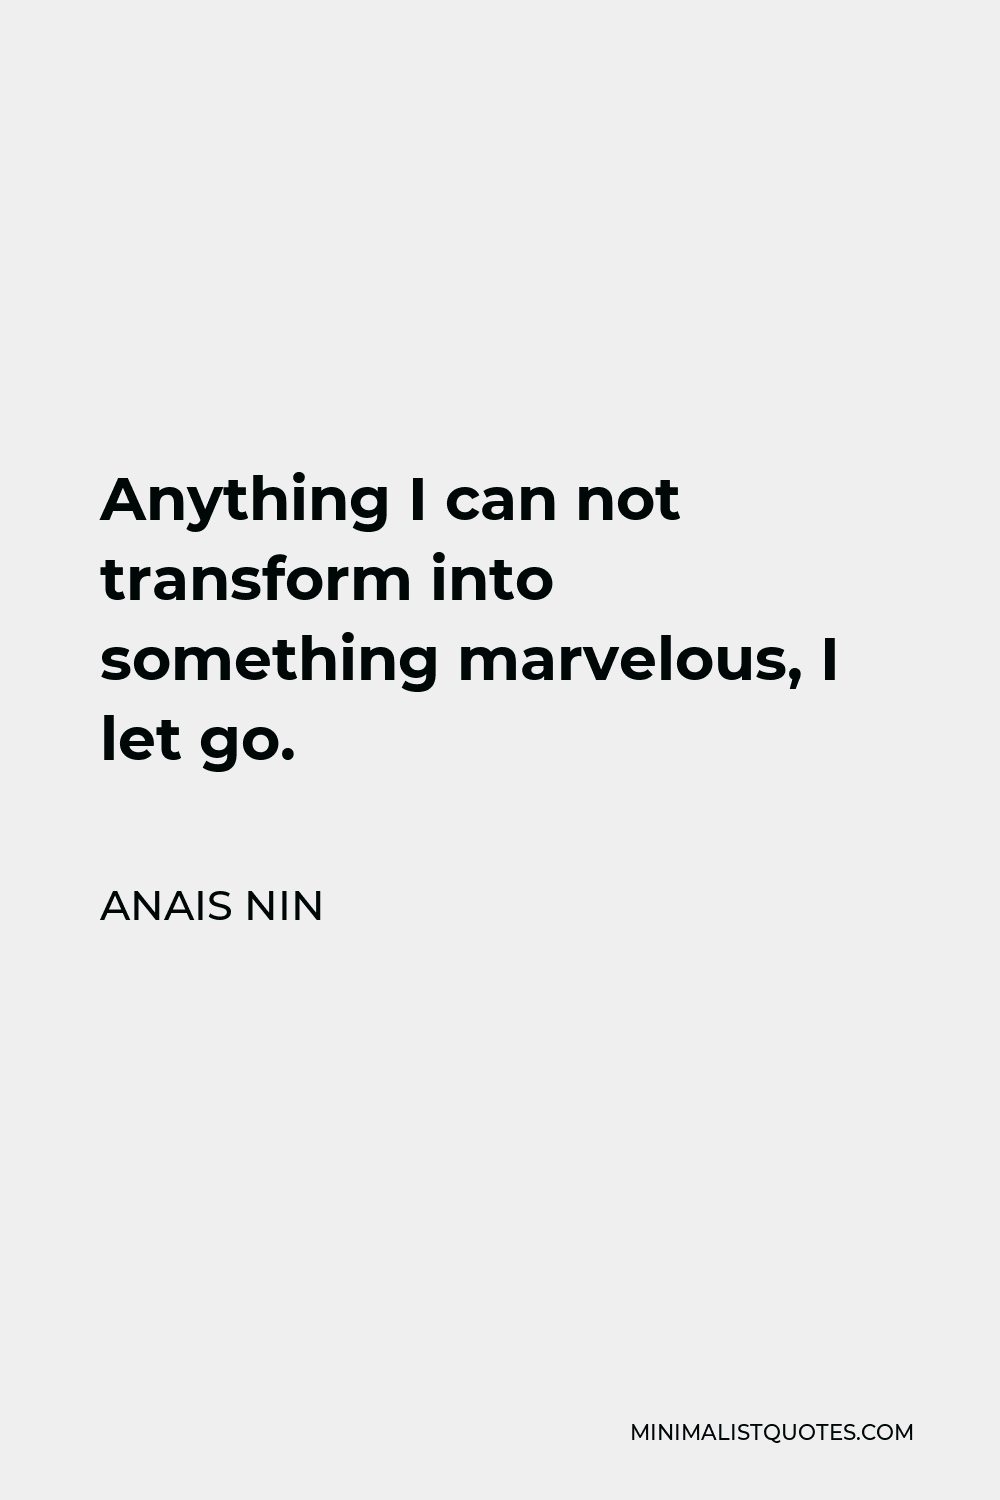 Anais Nin Quote - Anything I can not transform into something marvelous, I let go.